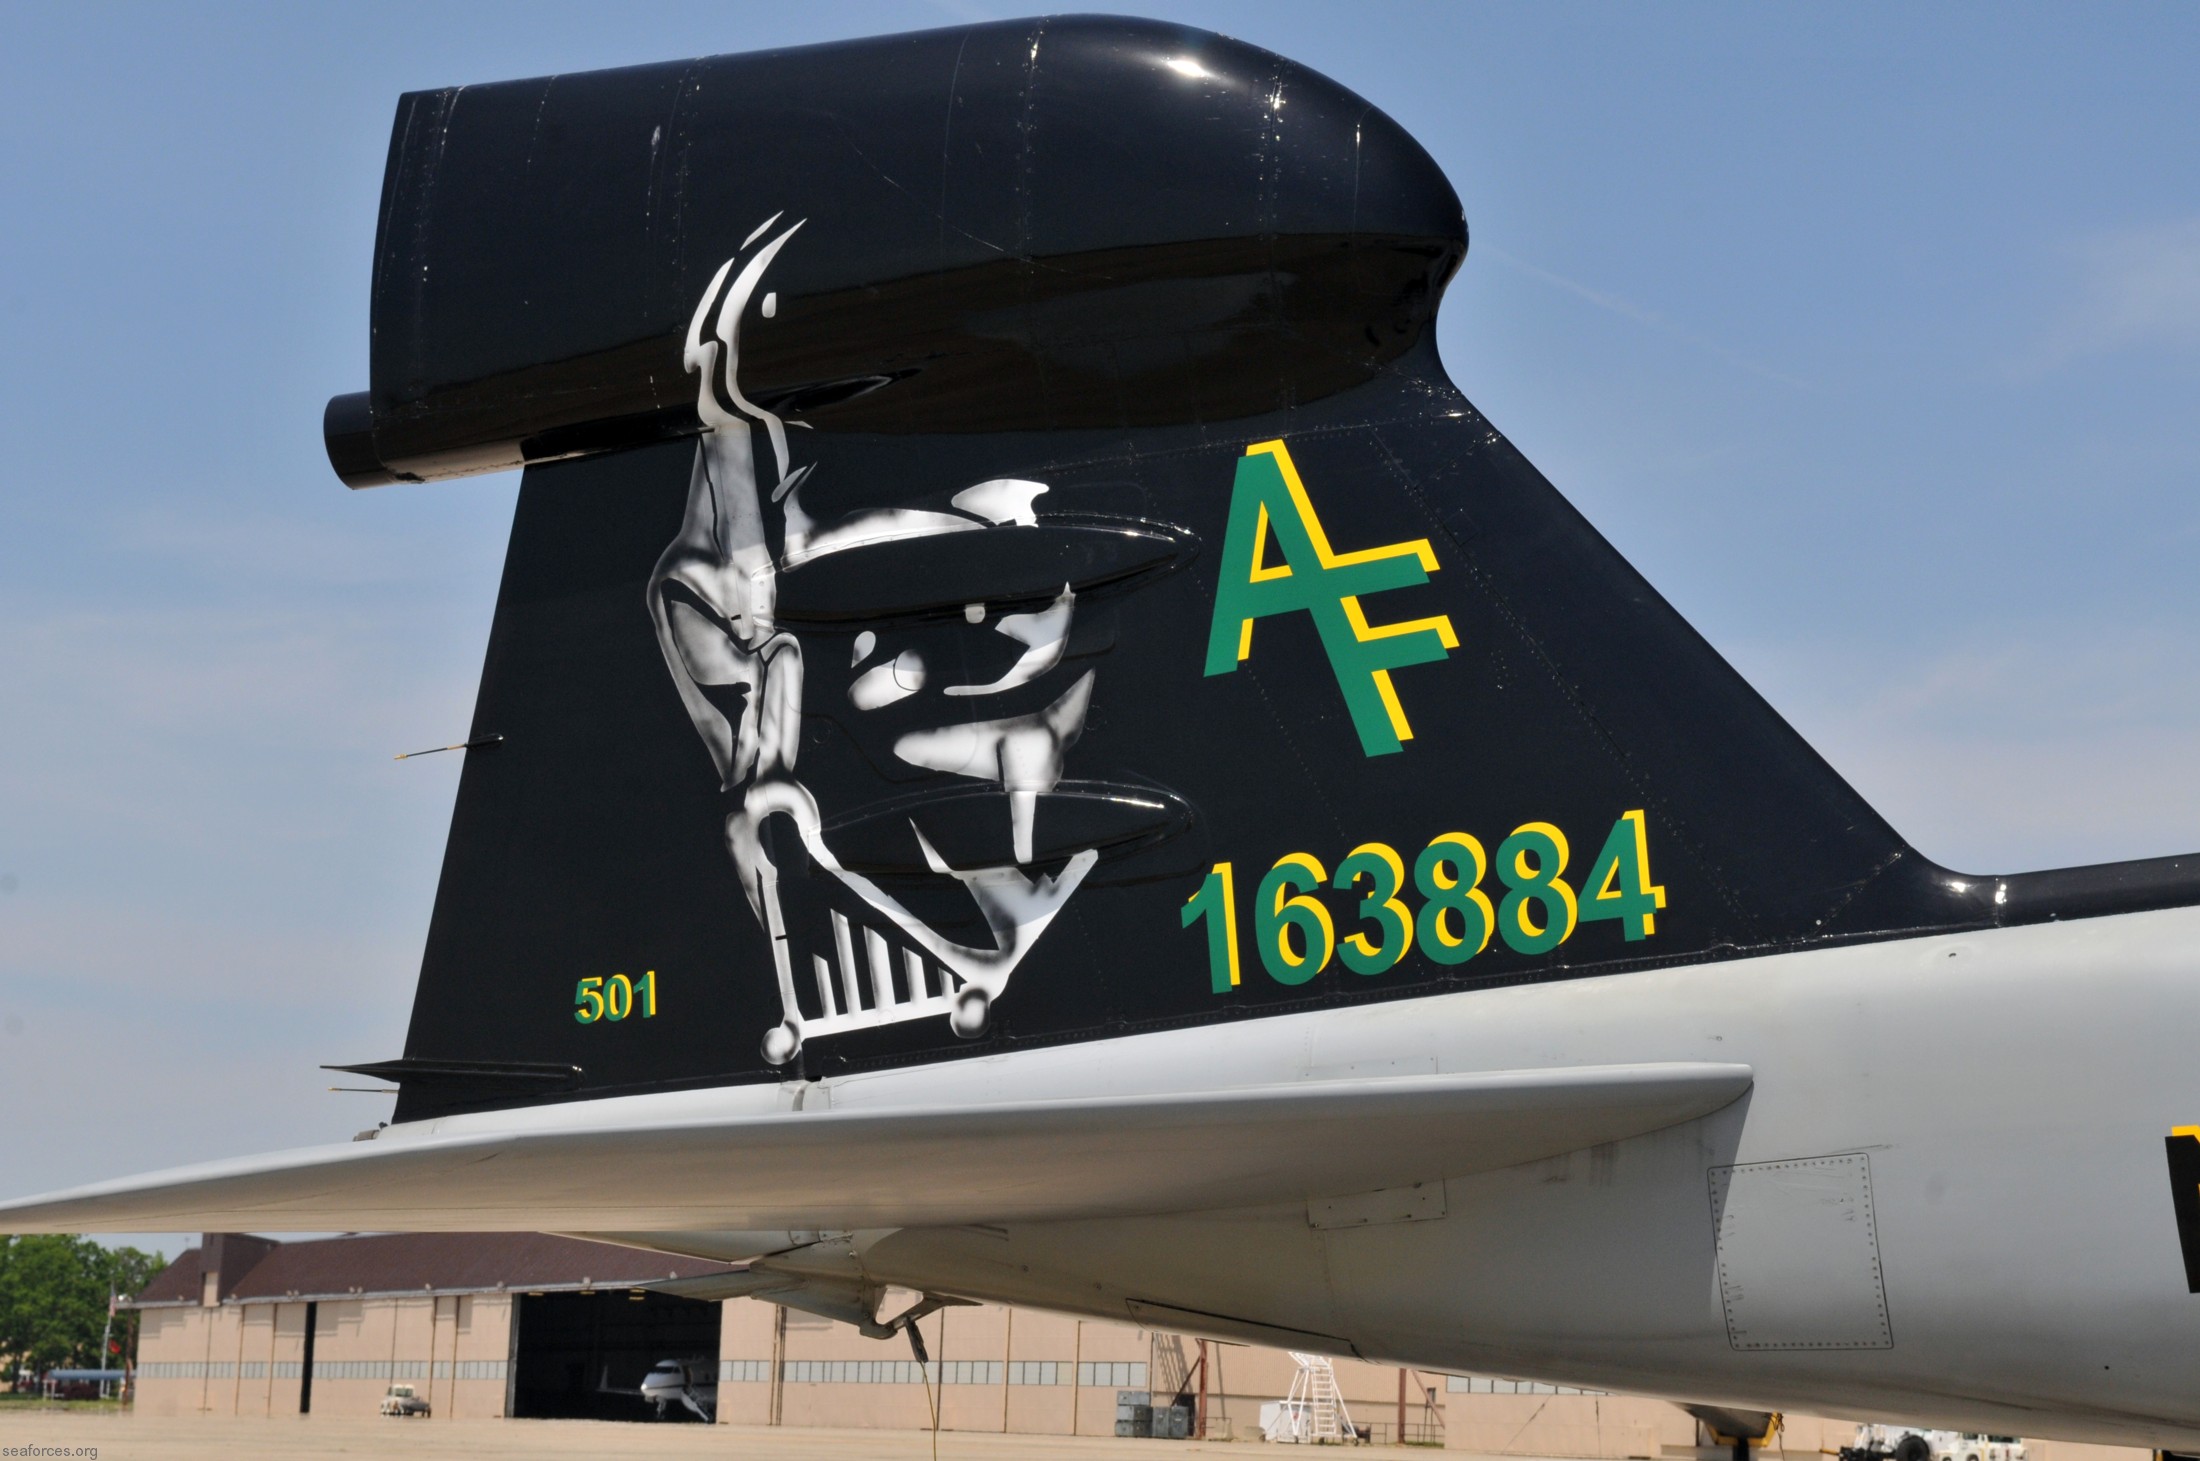 vaq-209 star warriors electronic attack squadron navy ea-6b prowler 23 special tail painting